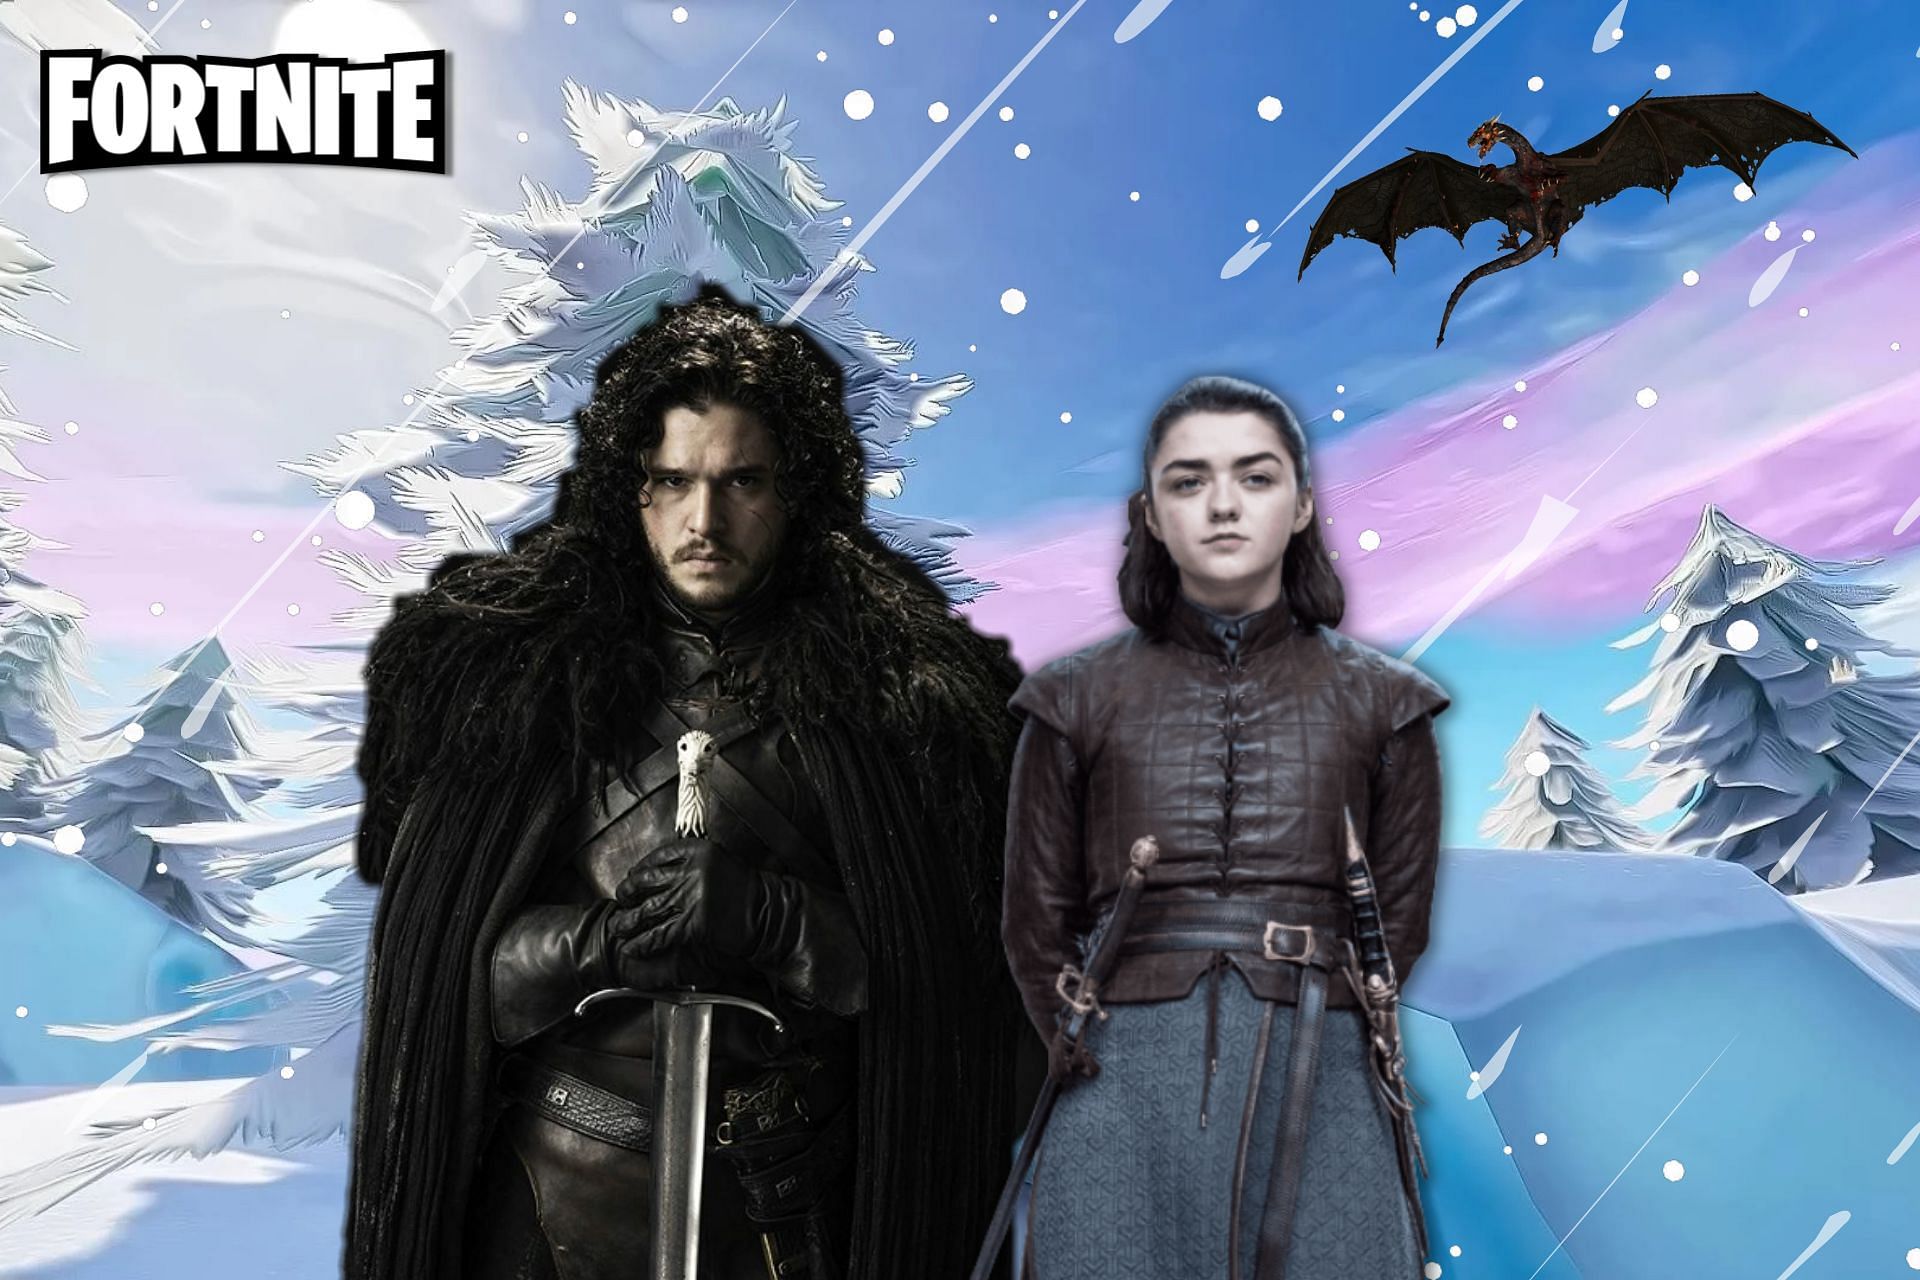 Fortnite x Game of Thrones collaboration could be coming soon (Image via Sportskeeda)